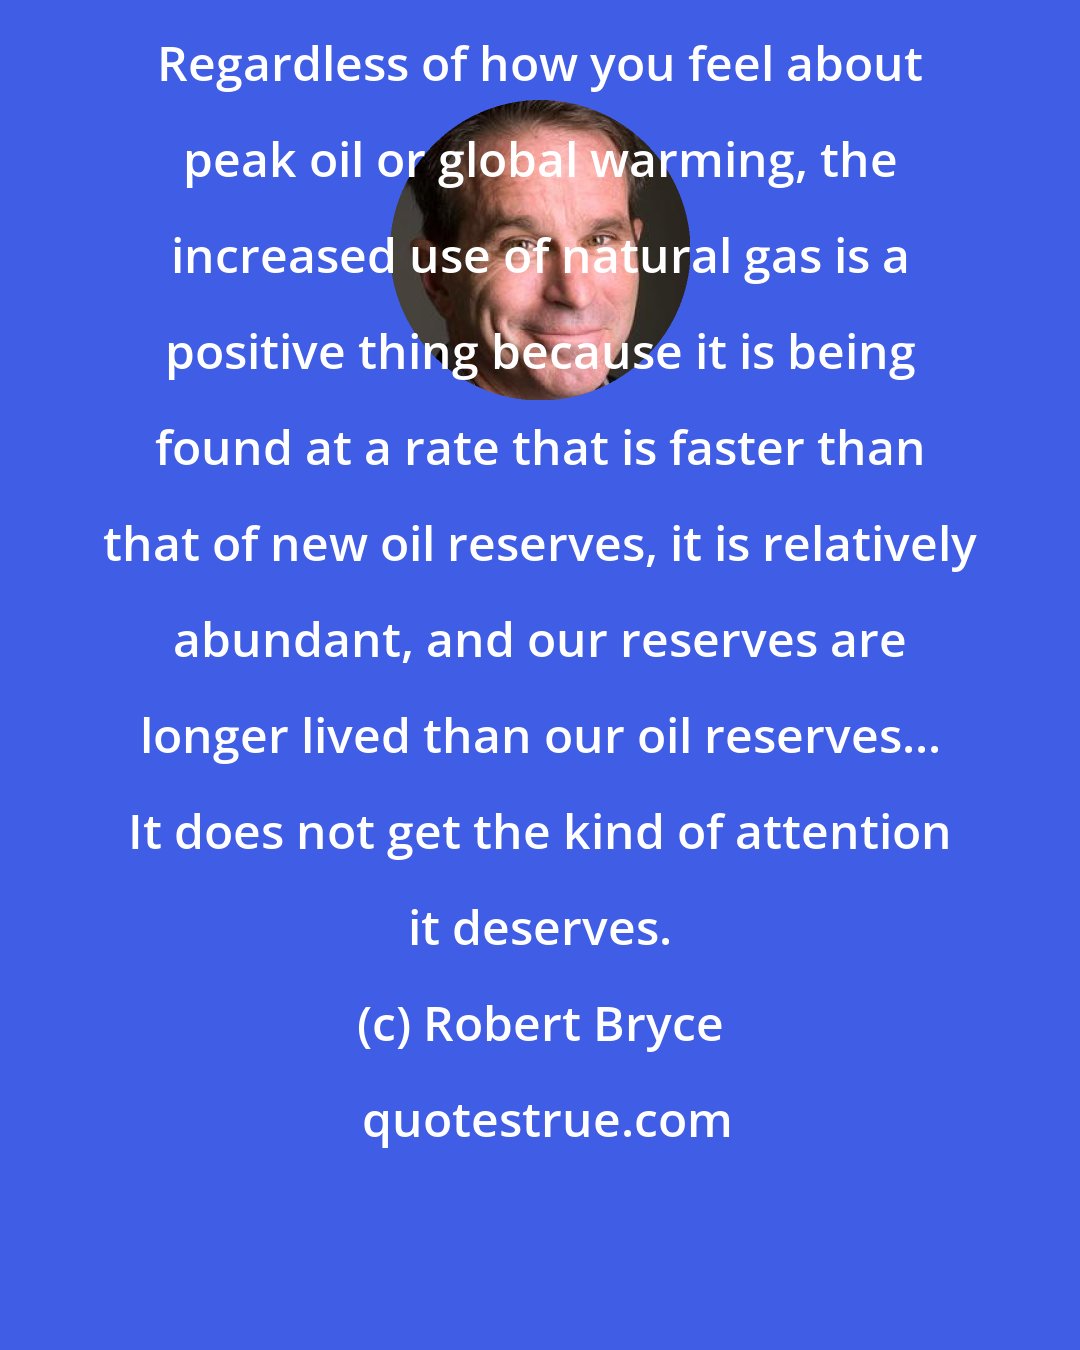 Robert Bryce: Regardless of how you feel about peak oil or global warming, the increased use of natural gas is a positive thing because it is being found at a rate that is faster than that of new oil reserves, it is relatively abundant, and our reserves are longer lived than our oil reserves... It does not get the kind of attention it deserves.